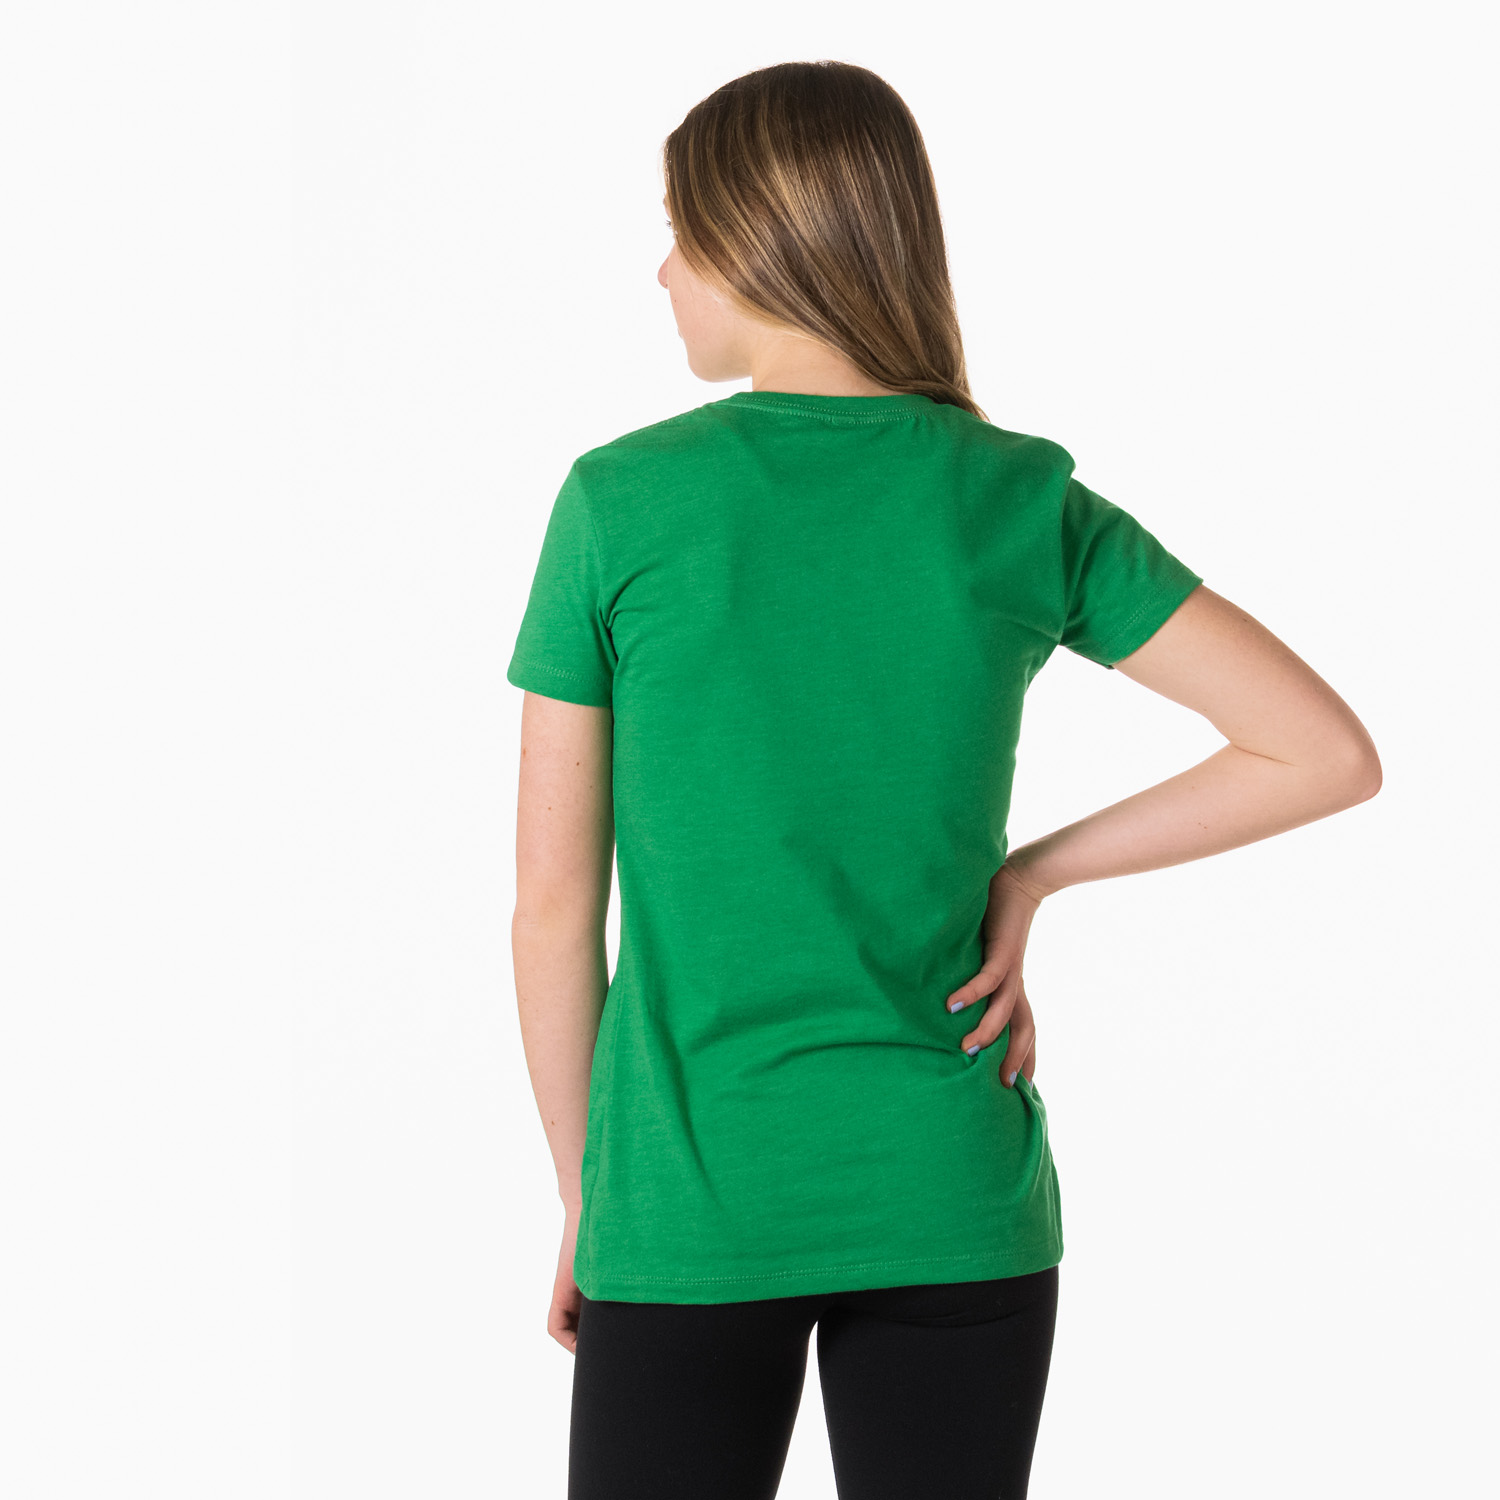 Women's Everyday Runners Tee - Spread Cheer Give Joy Run | Gone For a Run